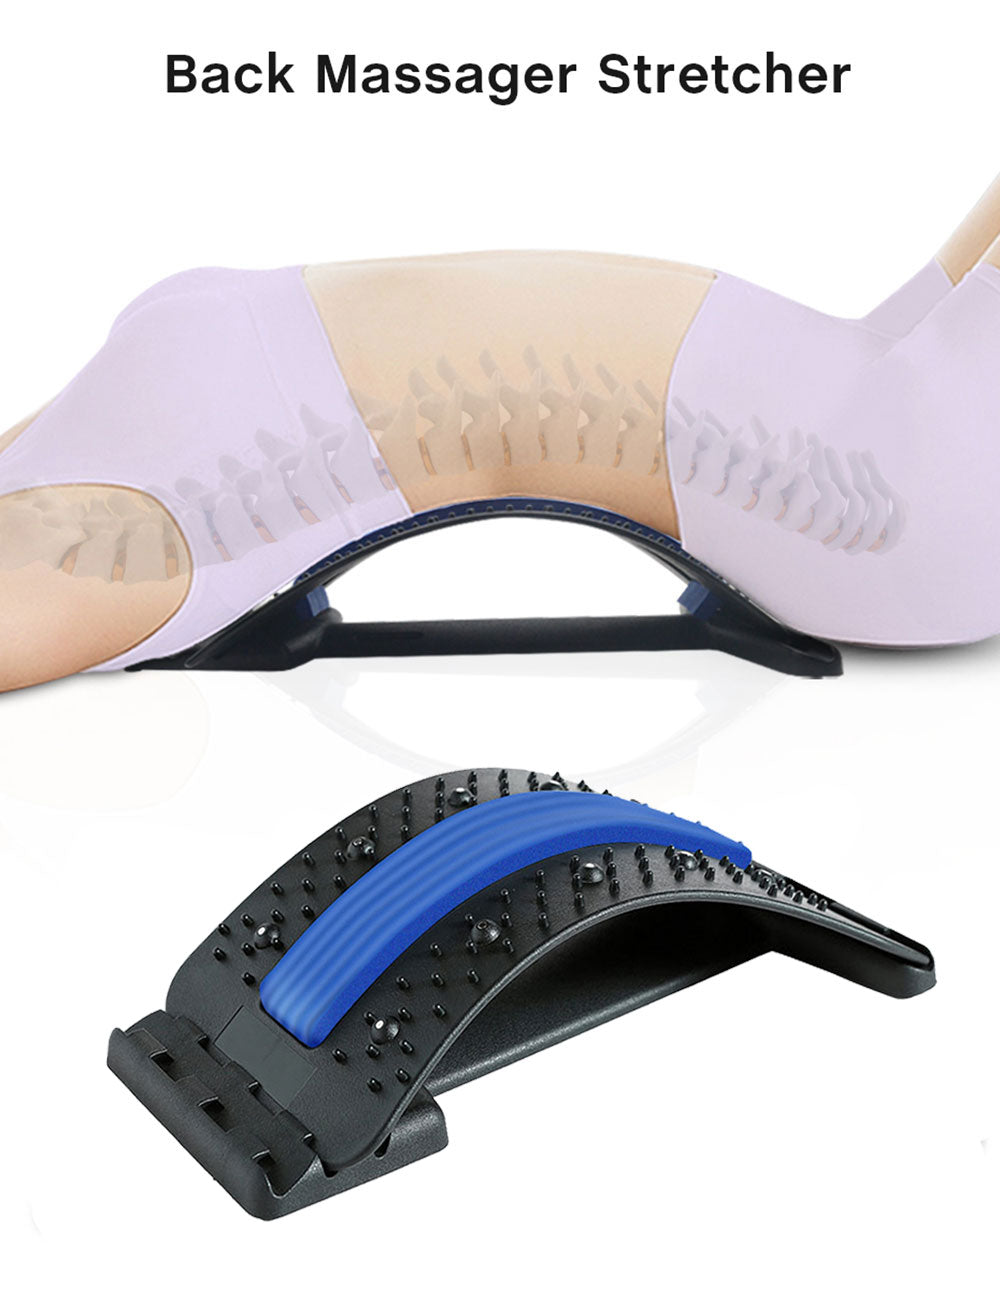 Multi-level Adjustable Back Massager Stretcher Waist Neck Stretch Fitness Lumbar Cervical Spine Support Pain Relief Relaxation